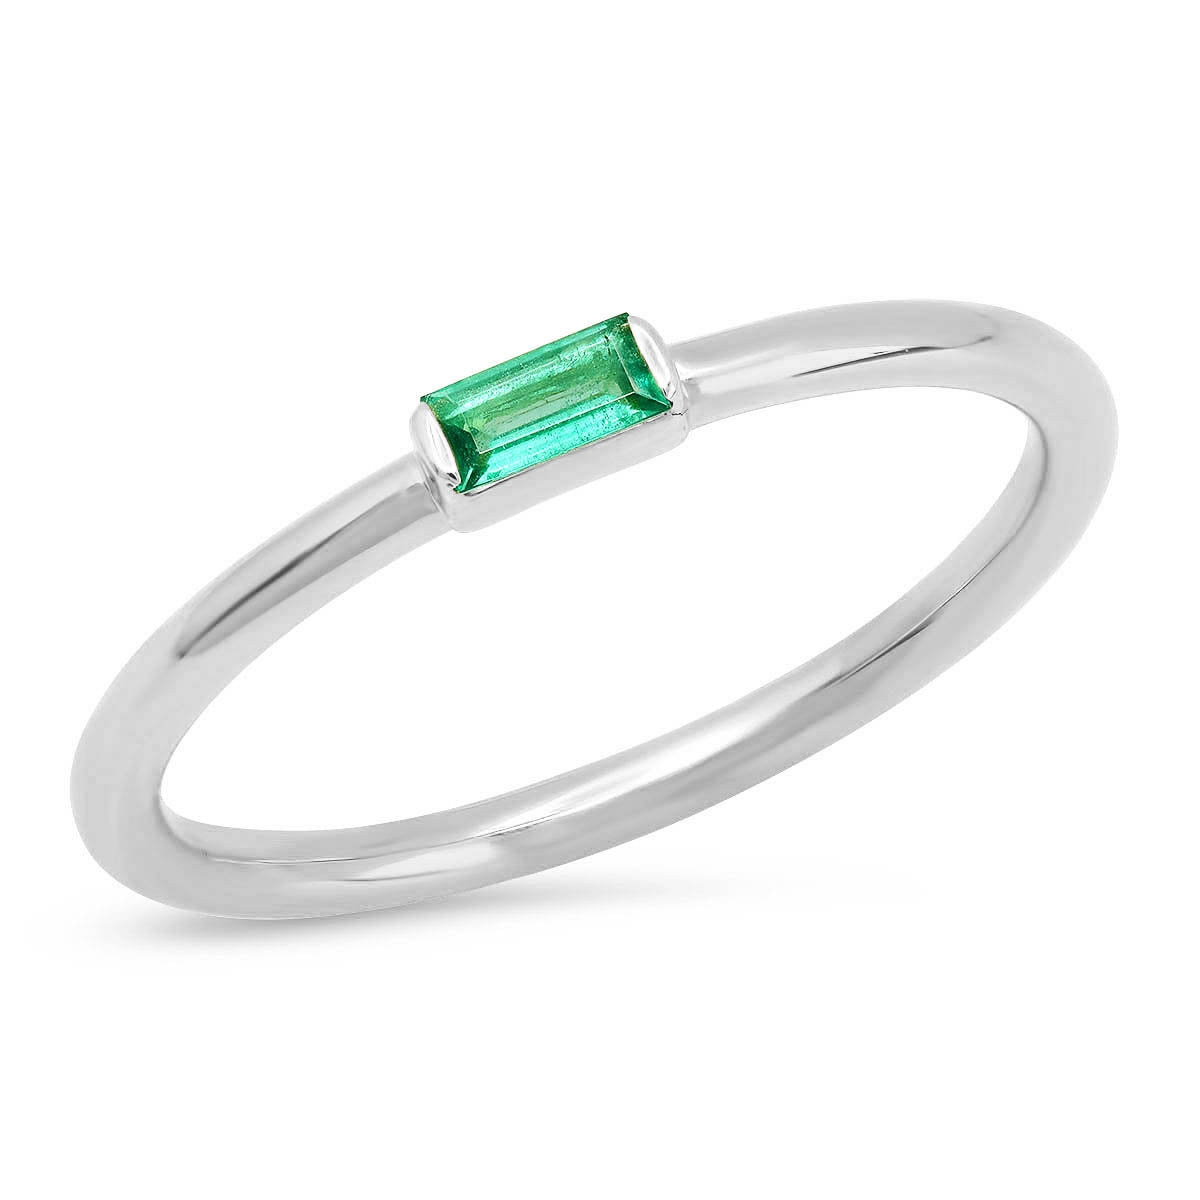 14K White Gold Emerald Baguette Solitaire Ring